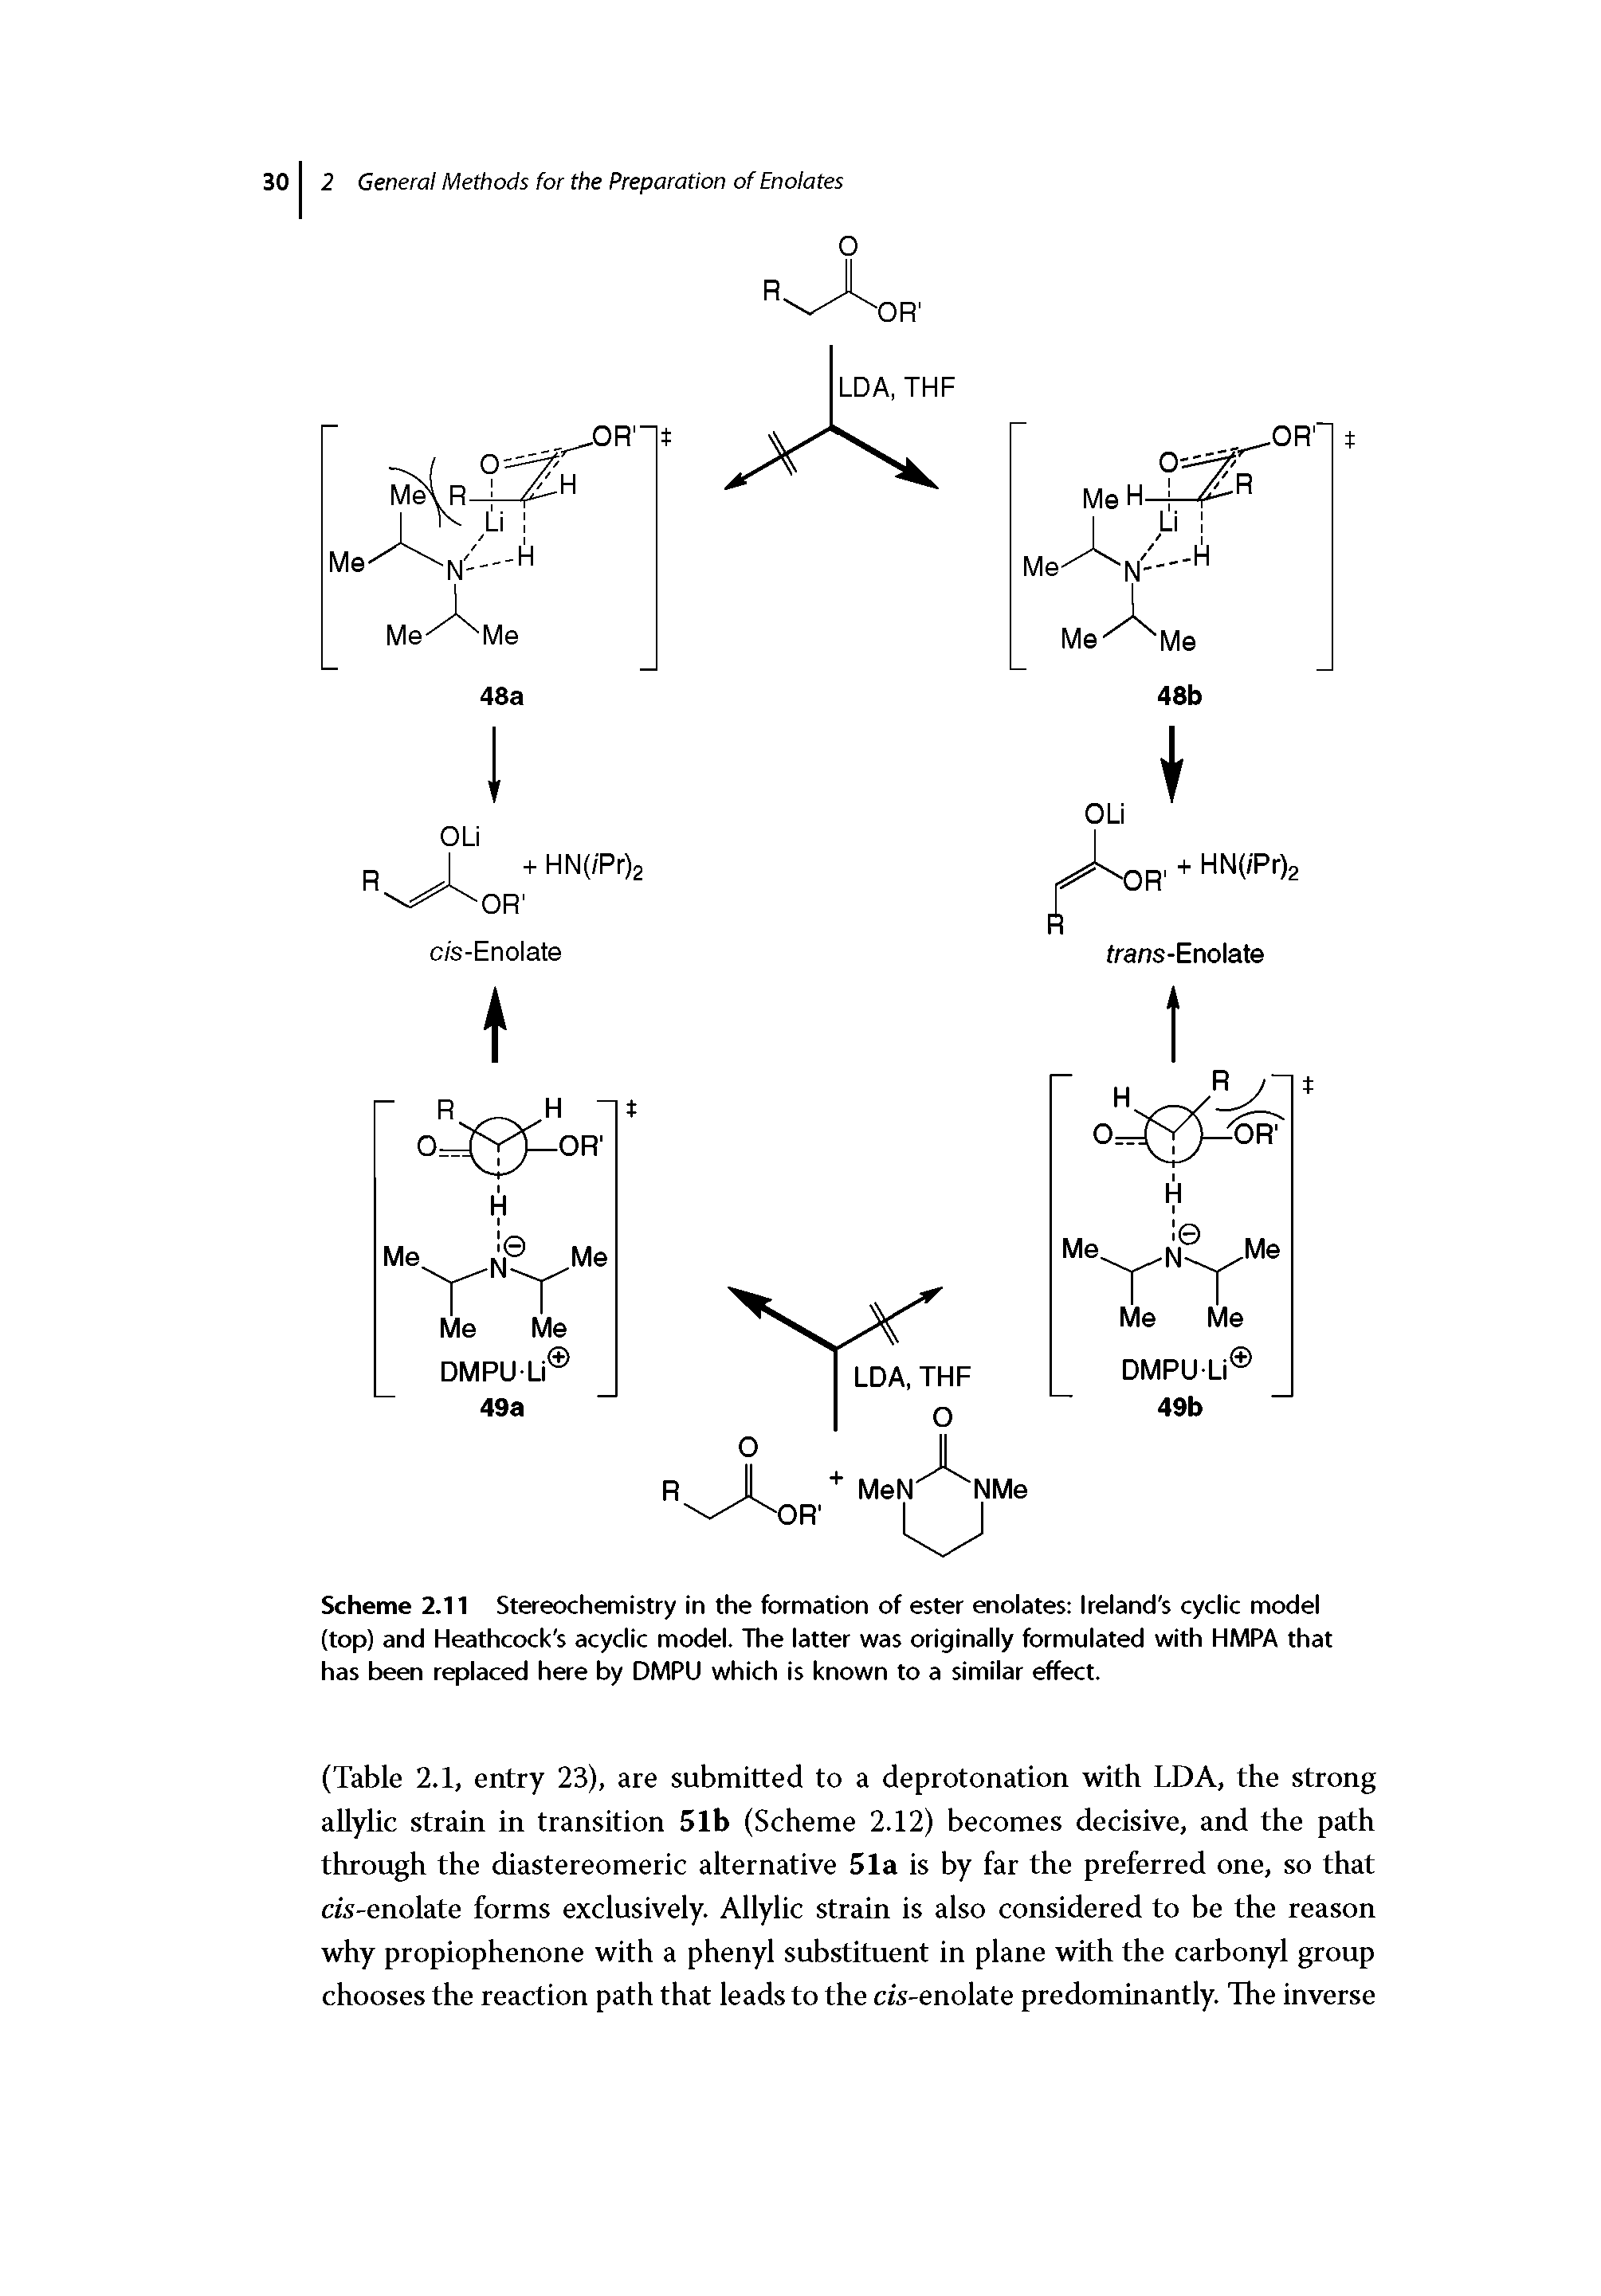 Scheme 2.11 Stereochemistry in the formation of ester enolates Ireland s cyclic model (top) and Heathcock s acyclic model. The latter was originally formulated with HMPA that has been replaced here by DMPU which is known to a similar effect.